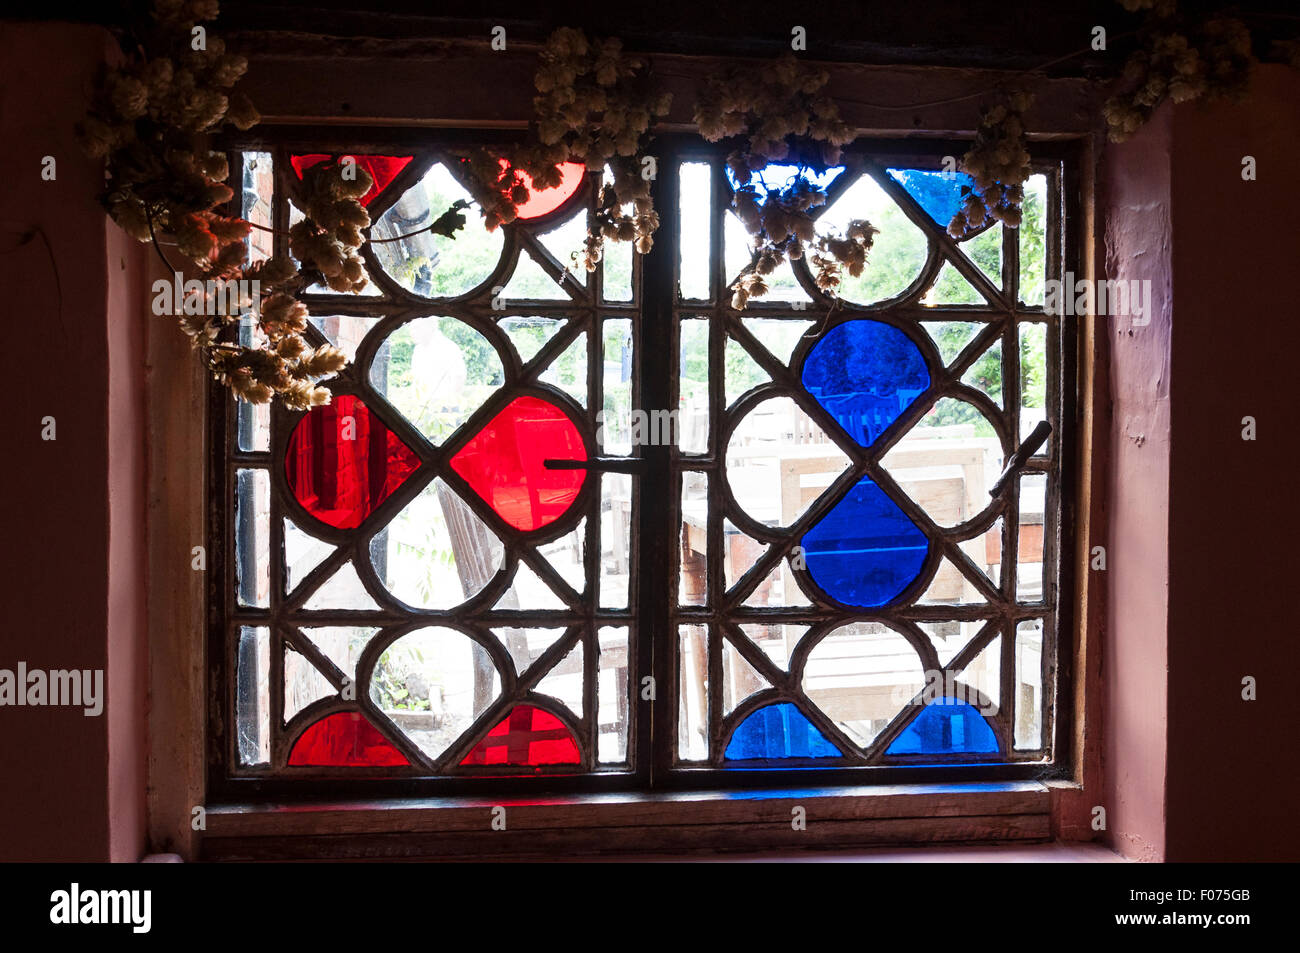 Ancient window in 'The Royal Standard of England' pub, Forty Green, Beaconsfield, Buckinghamshire, England, United Kingdom Stock Photo